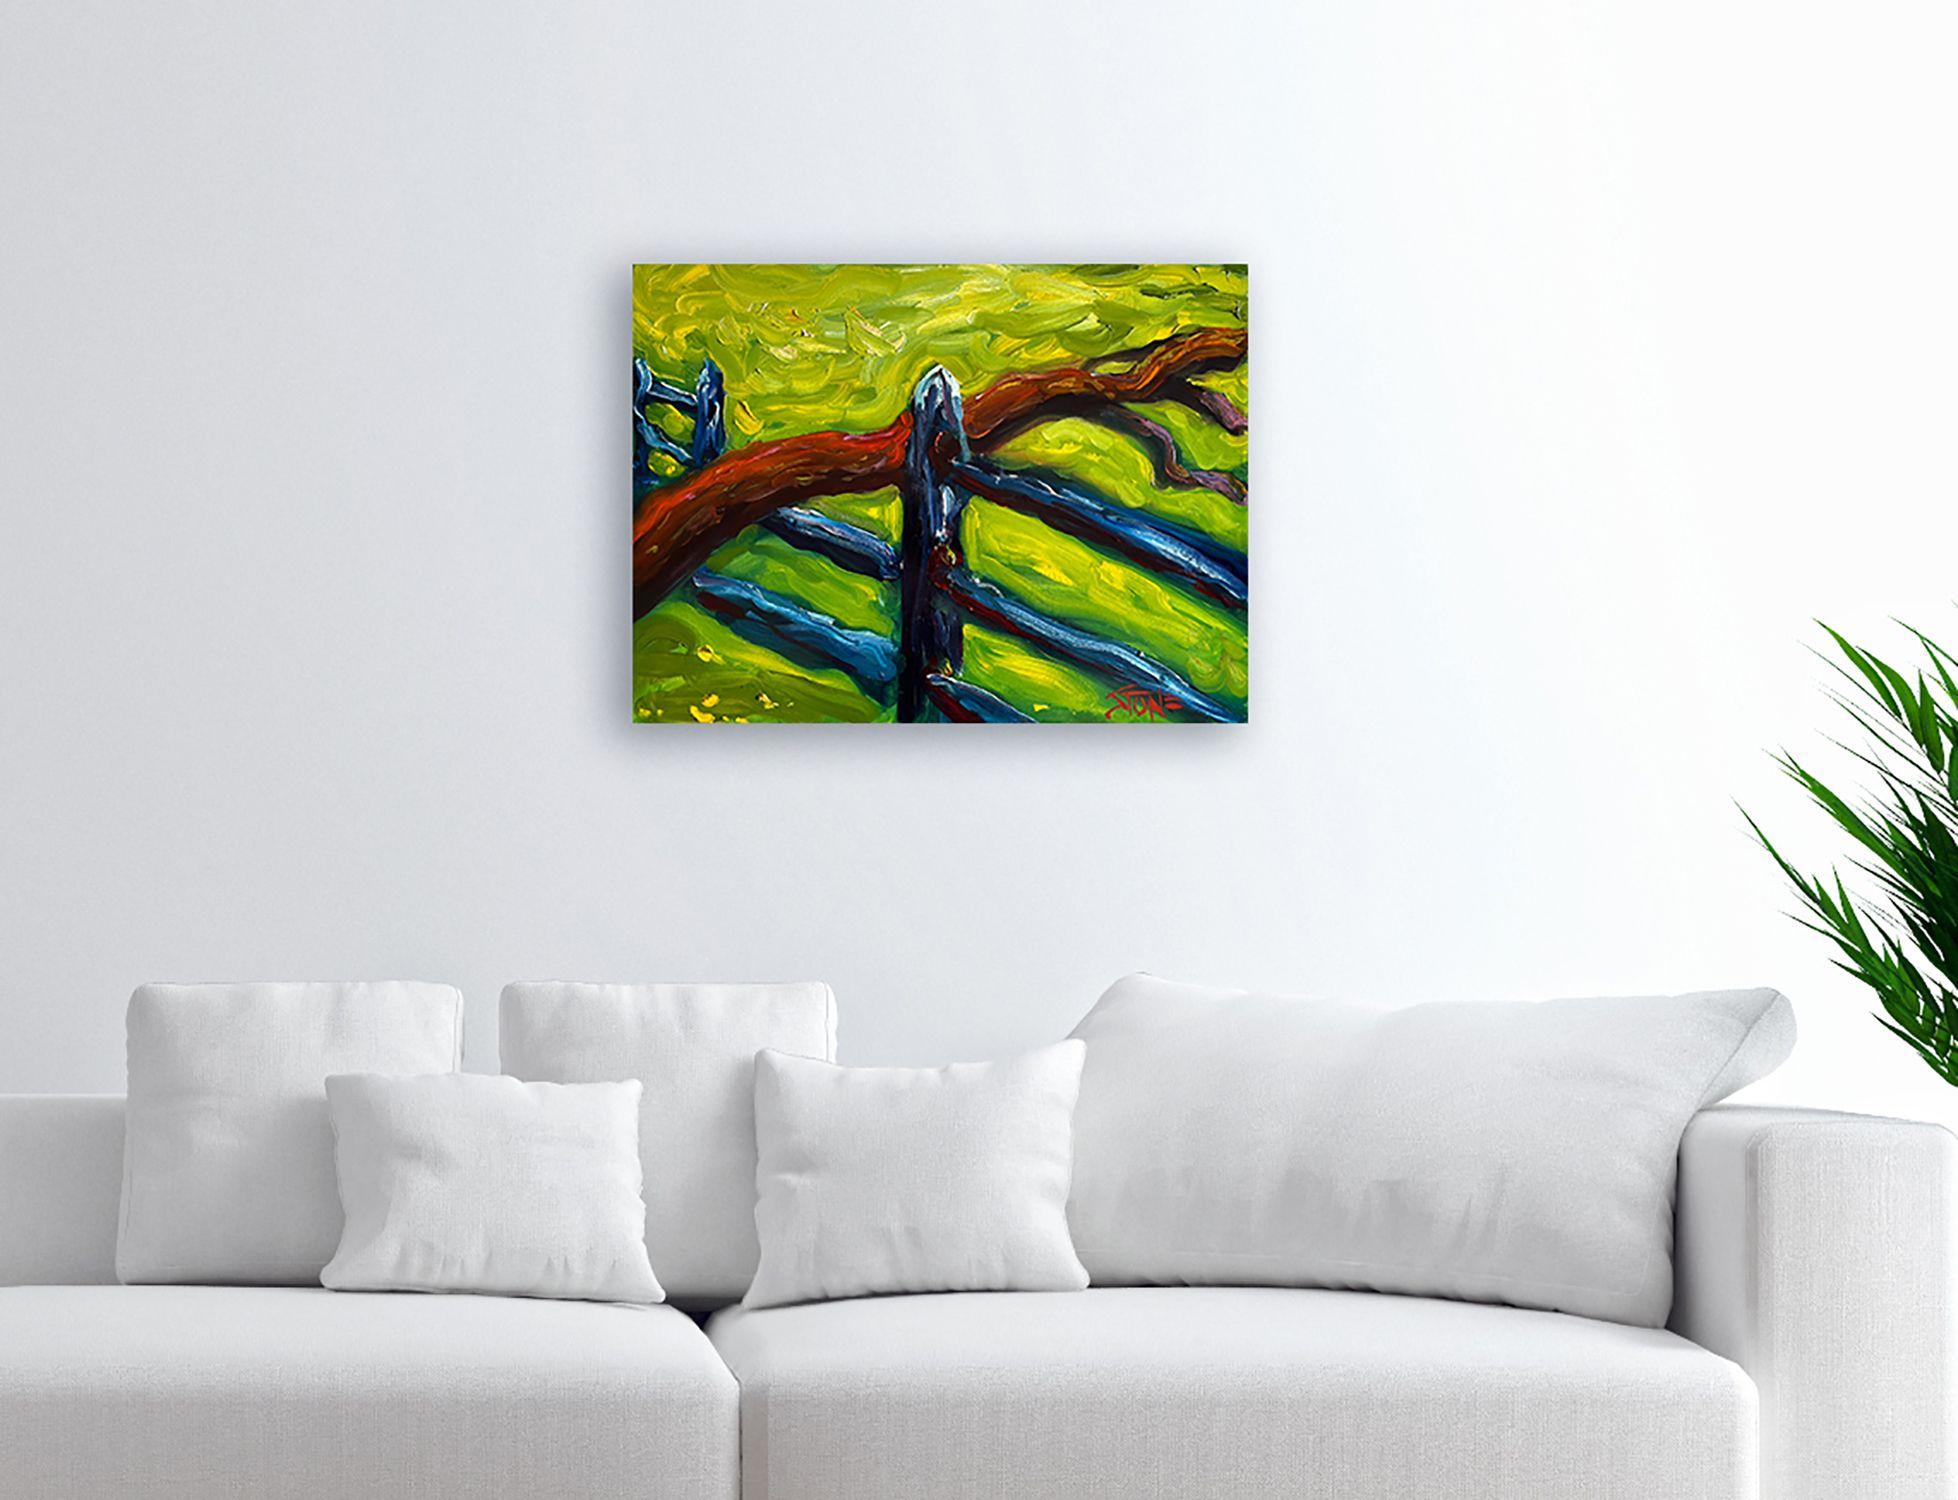 A long time ago the wind made a tree break a fence. (Side-stapled canvas, should be framed.) :: Painting :: Impressionist :: This piece comes with an official certificate of authenticity signed by the artist :: Ready to Hang: Yes :: Signed: Yes ::